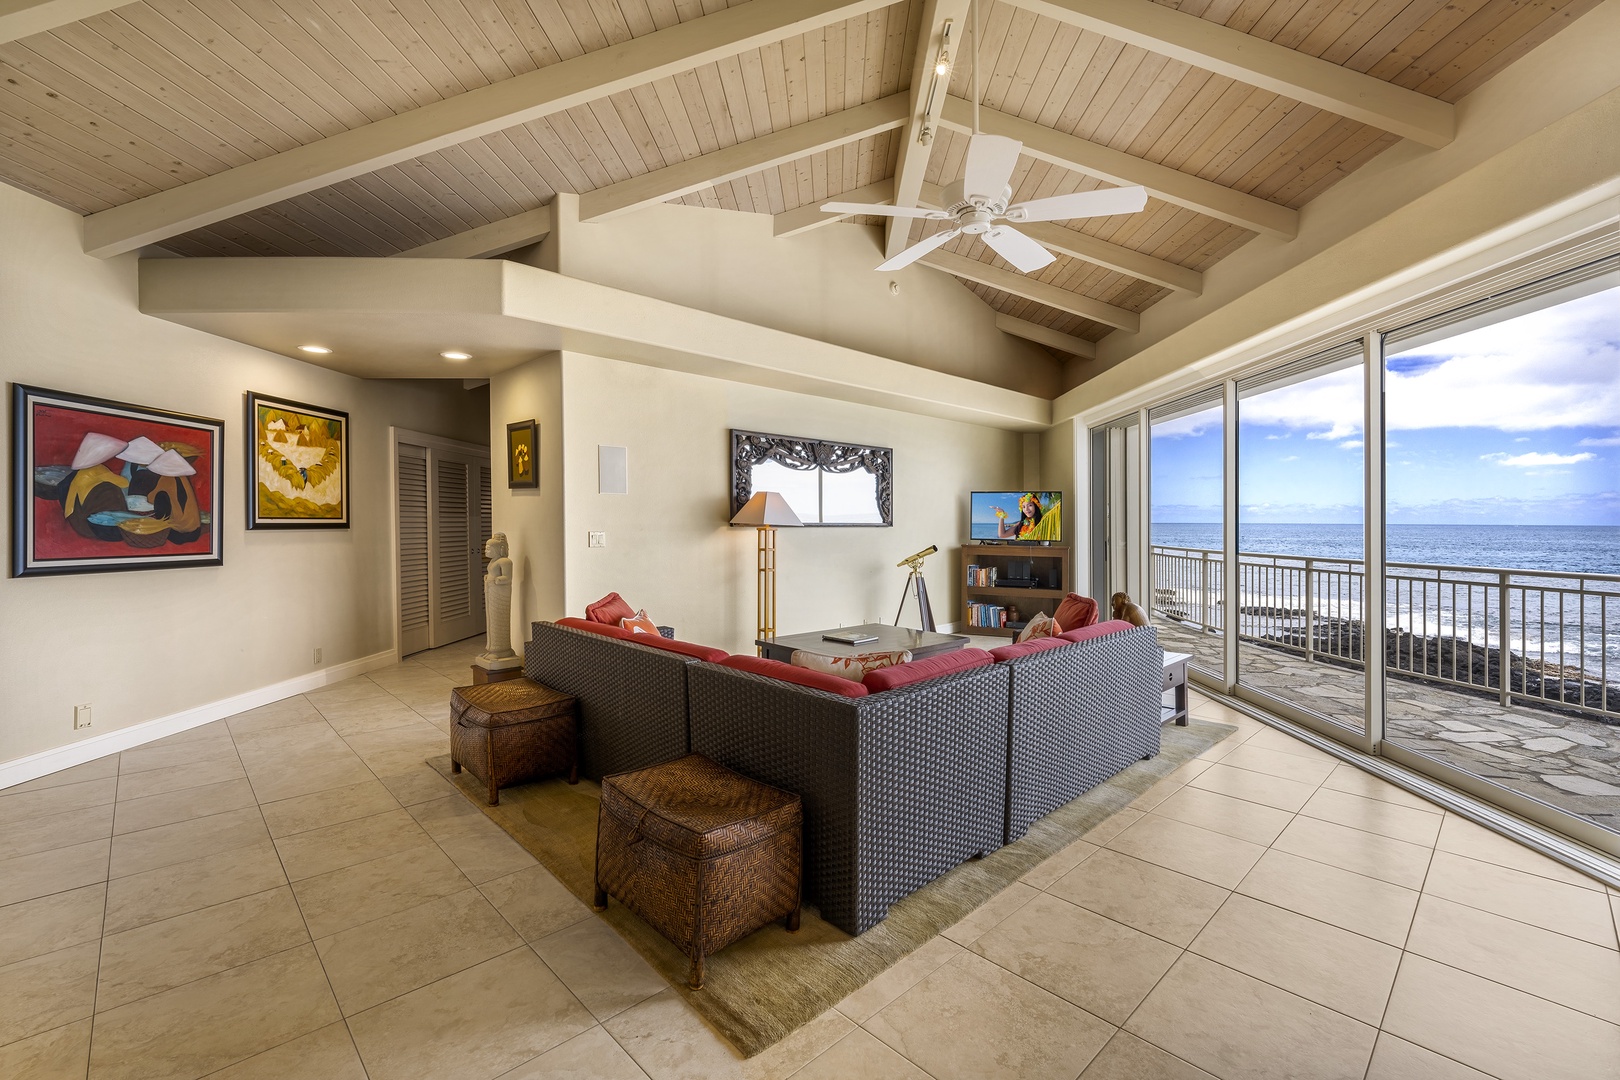 Kailua Kona Vacation Rentals, Ali'i Point #12 - Whether you prefer to watch TV or take in the views the choice is yours!